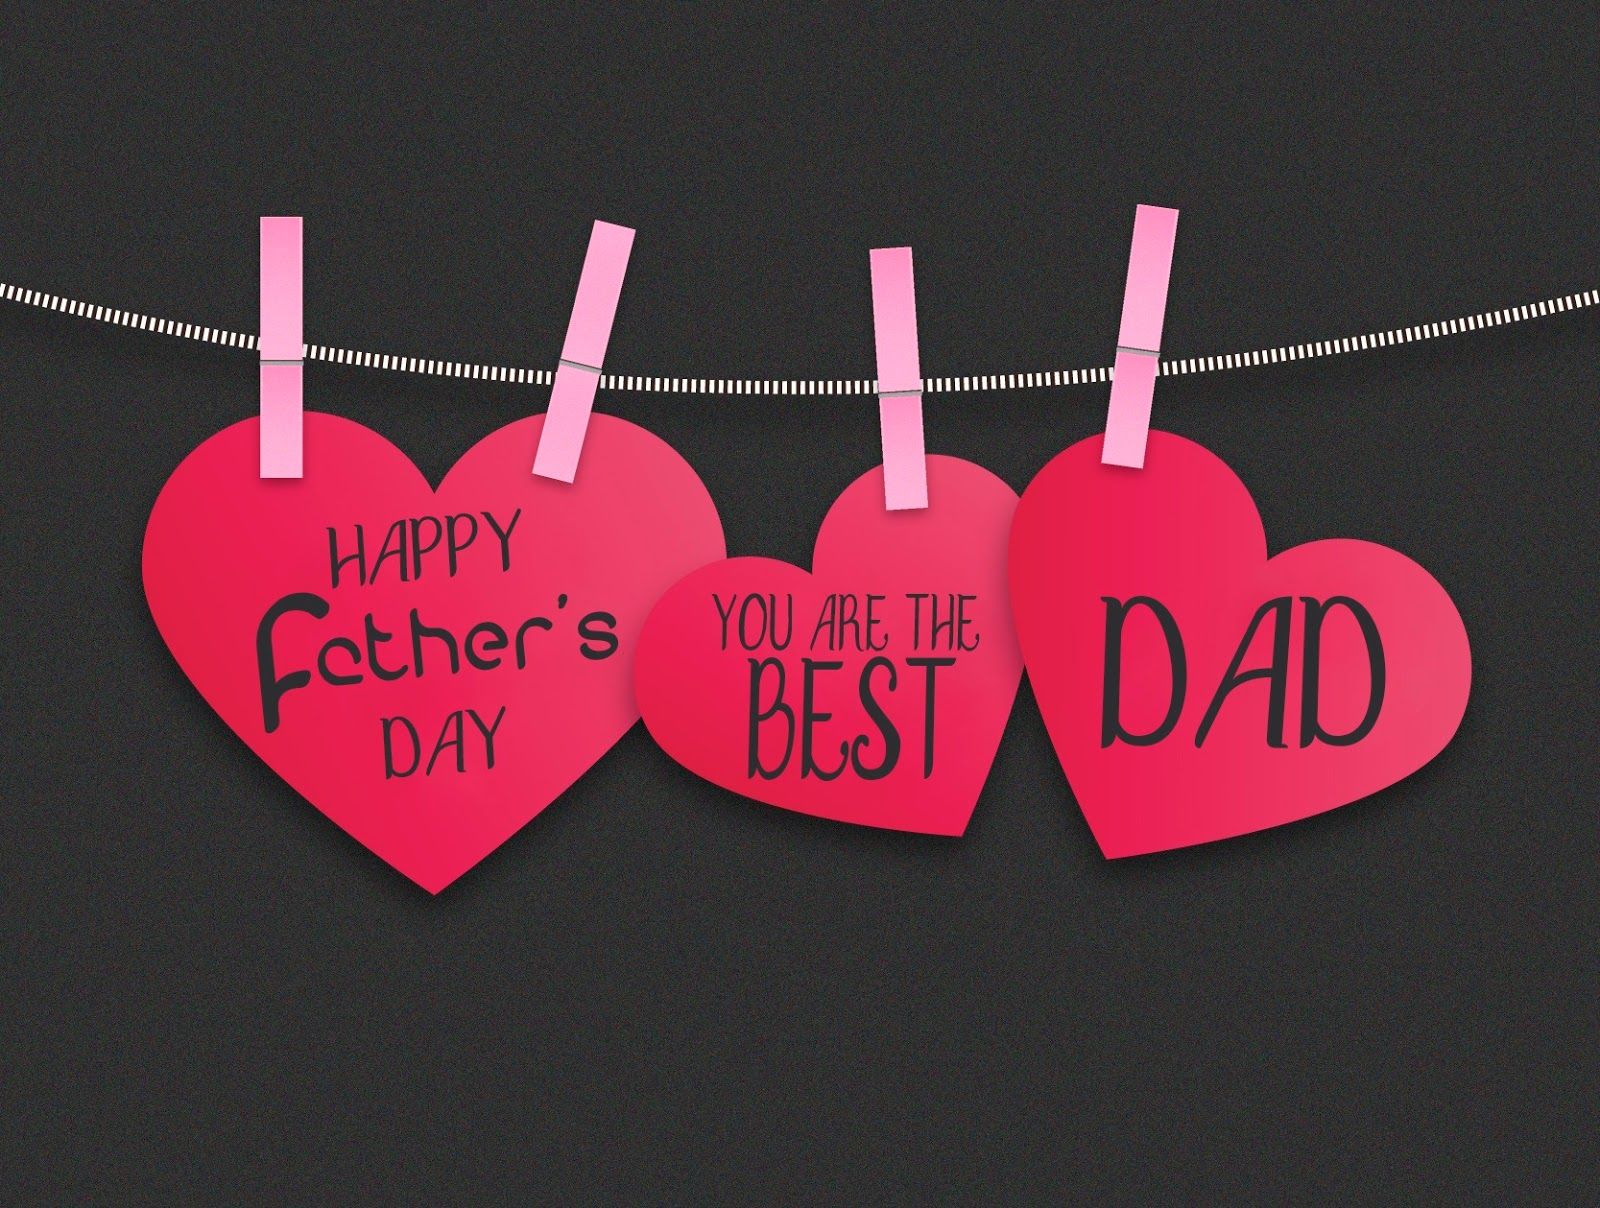 Happy Fathers Day 2016 HD Wallpaper Free Download